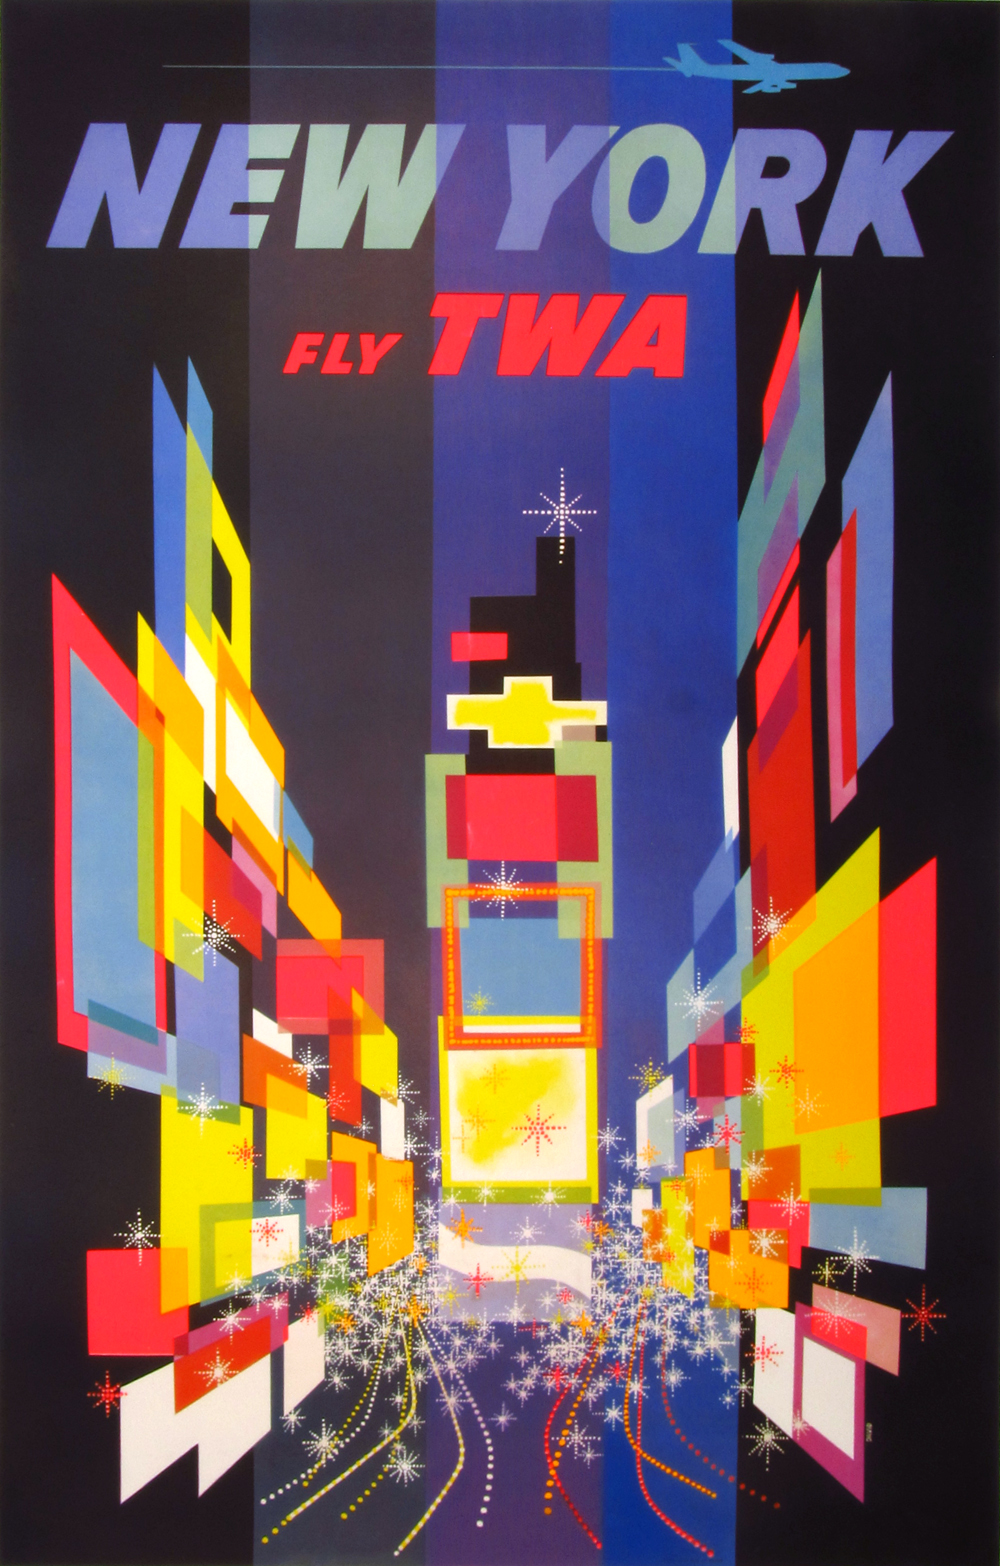 New York Fly TWA (Times Square)